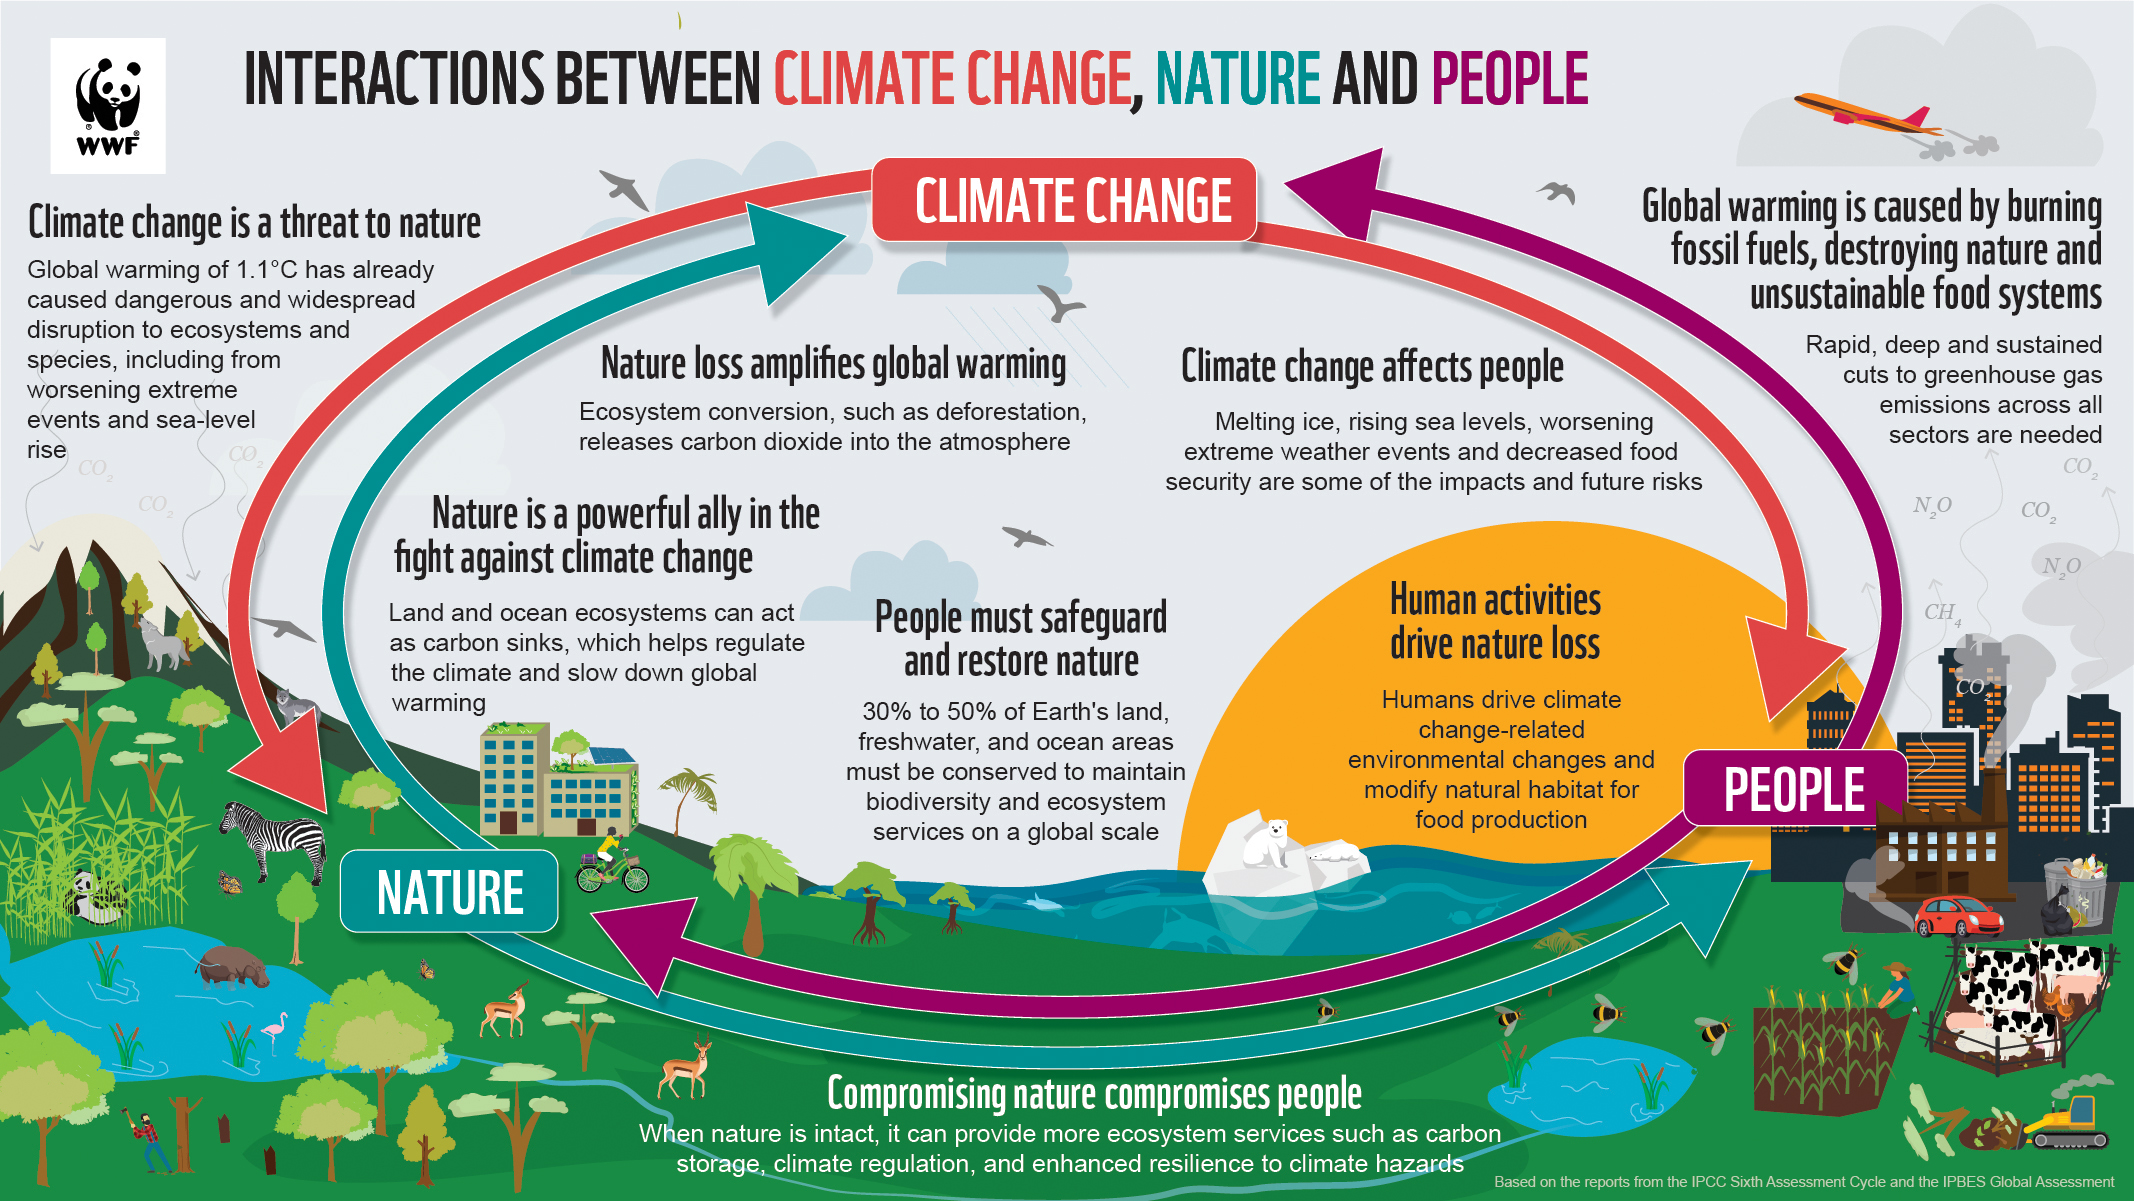 Infographic on interactions between climate change, nature and people